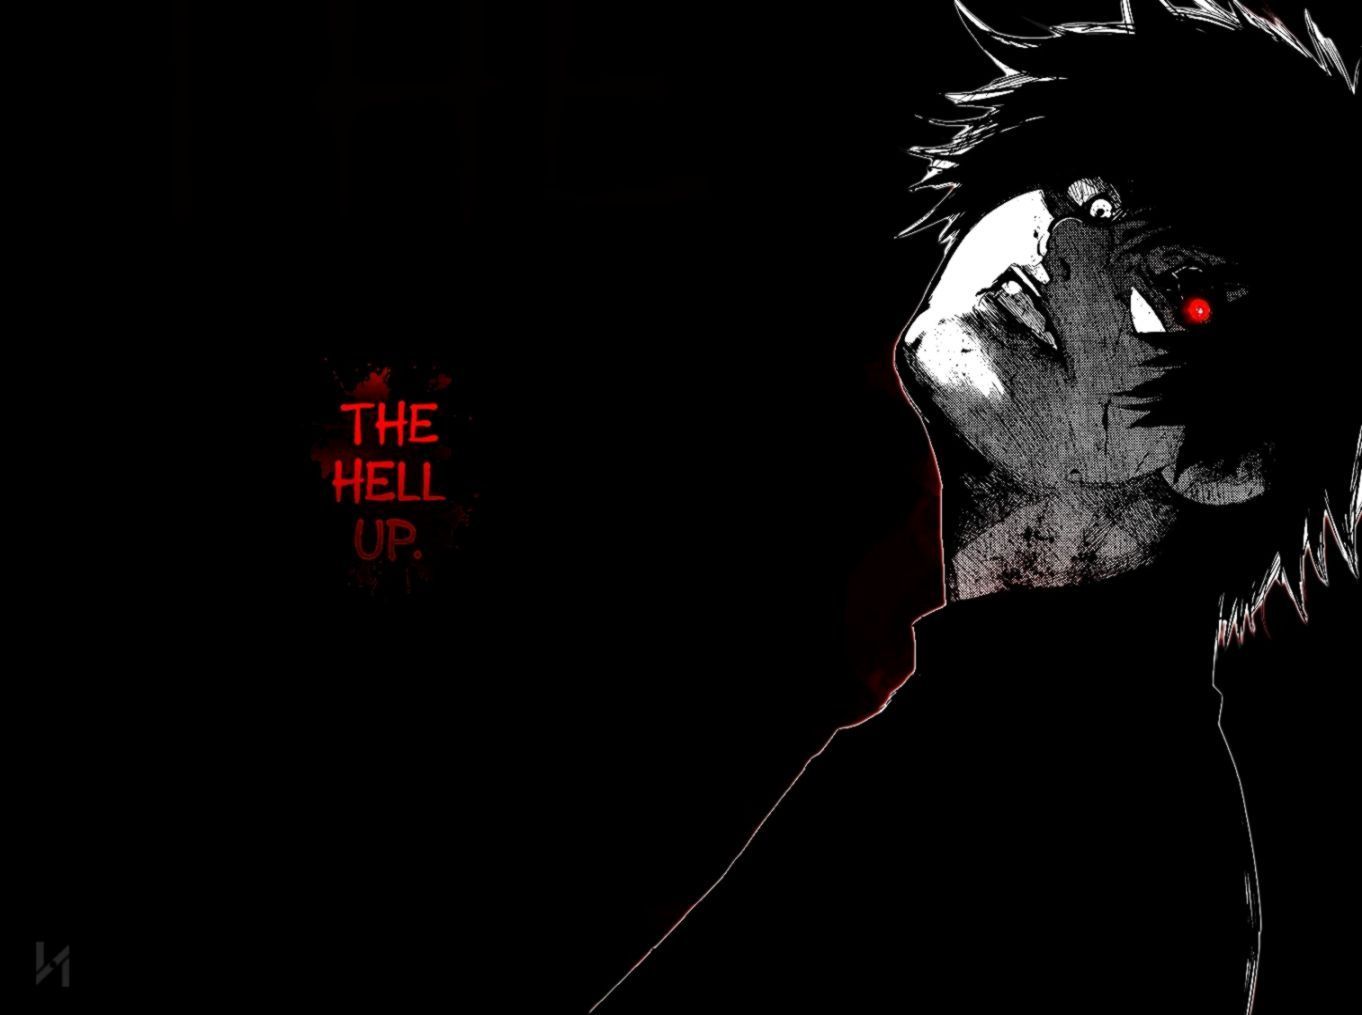 Tokyo Ghoul Black and White Wallpaper Free Tokyo Ghoul Black and White Background